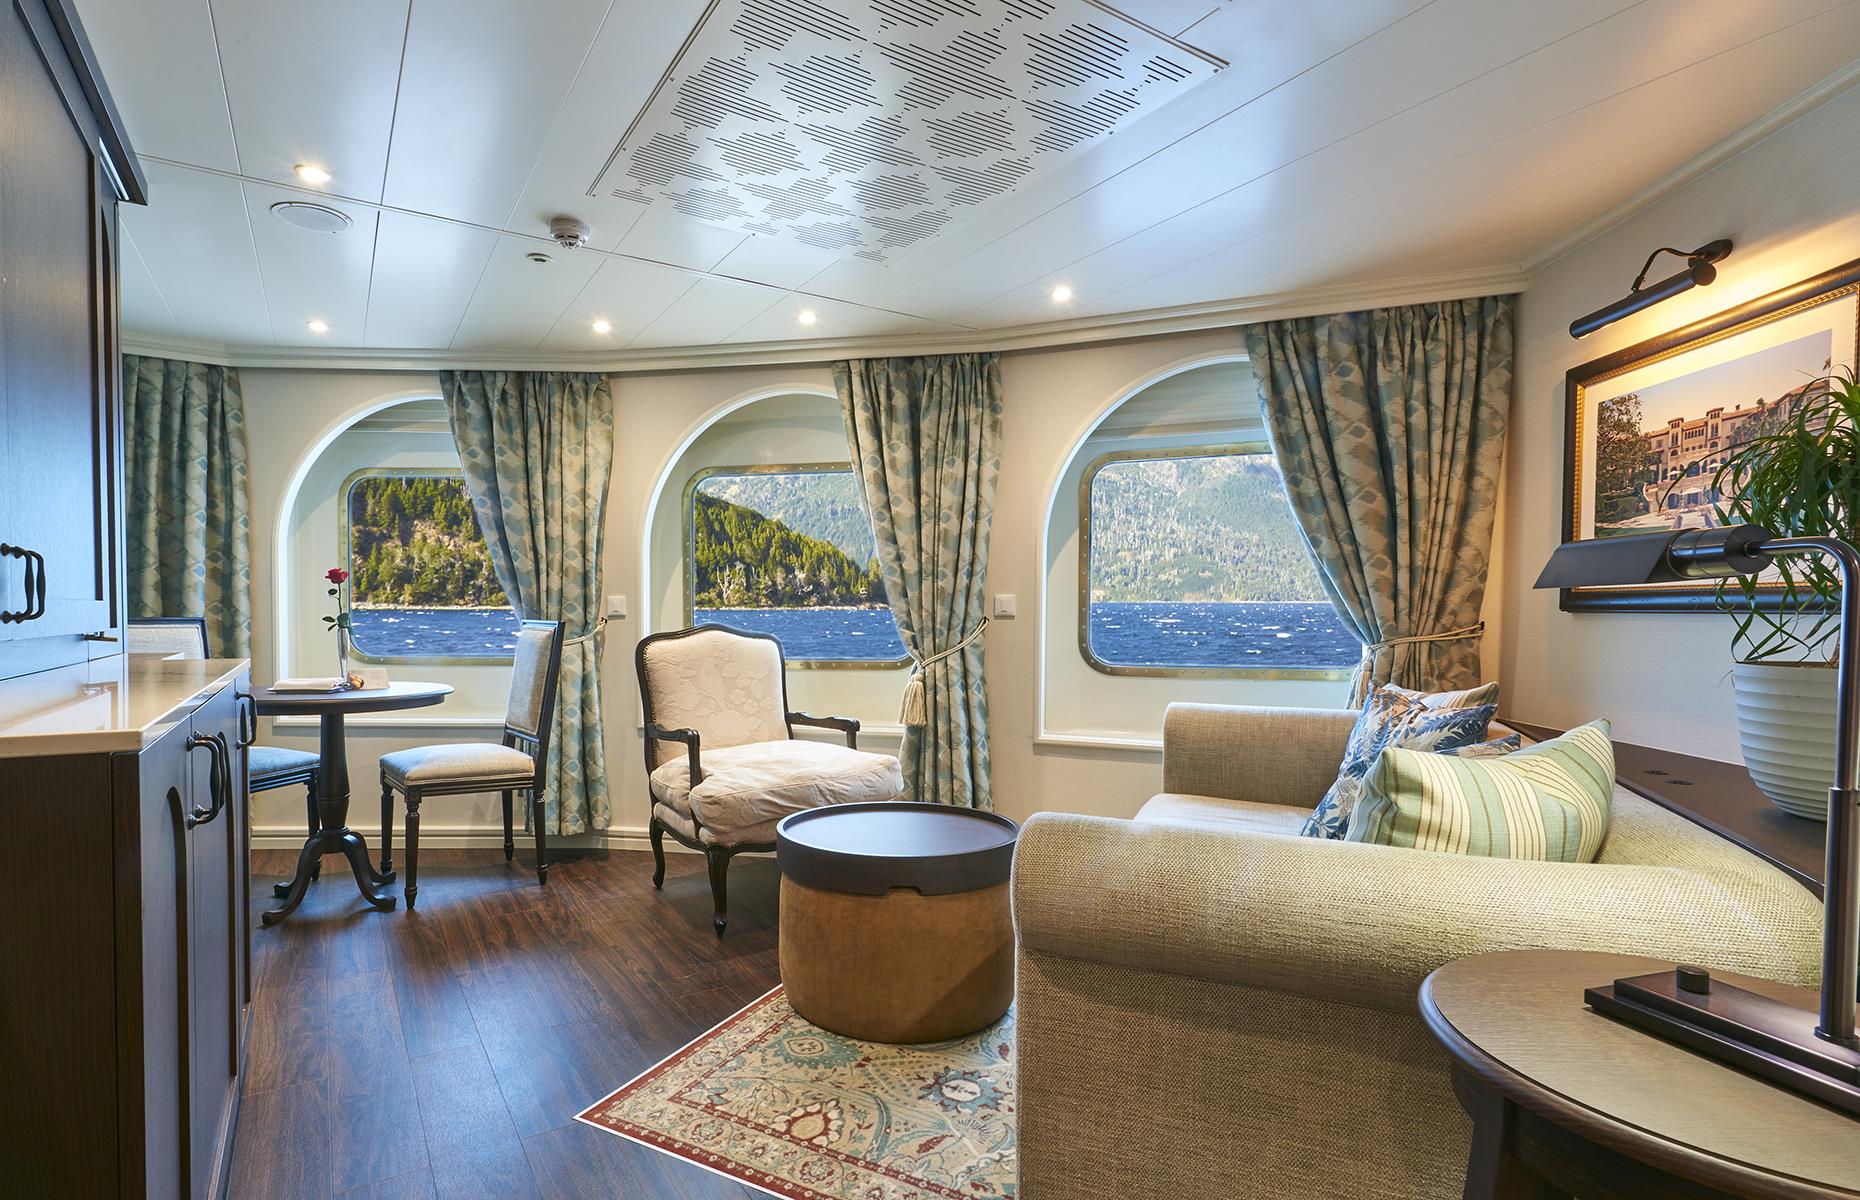 <p>Sail on <a href="https://www.windstarcruises.com/ships/star-legend/">Windstar Cruises’ Star Legend</a> and you can book a suite inspired by exotic destinations and hotels. We recommend the suite inspired by the Sea Island resort in Georgia. Expect ocean-inspired colourways and plenty of sea-glass green. A Treasures of the Greek Isles cruise with Windstar starts from $3,745 per person.</p>  <p><a href="https://www.loveexploring.com/galleries/92727/amazing-facts-about-cruise-ships-you-might-not-know?page=1"><strong>Now discover amazing facts about cruise ships you might not know</strong></a></p>